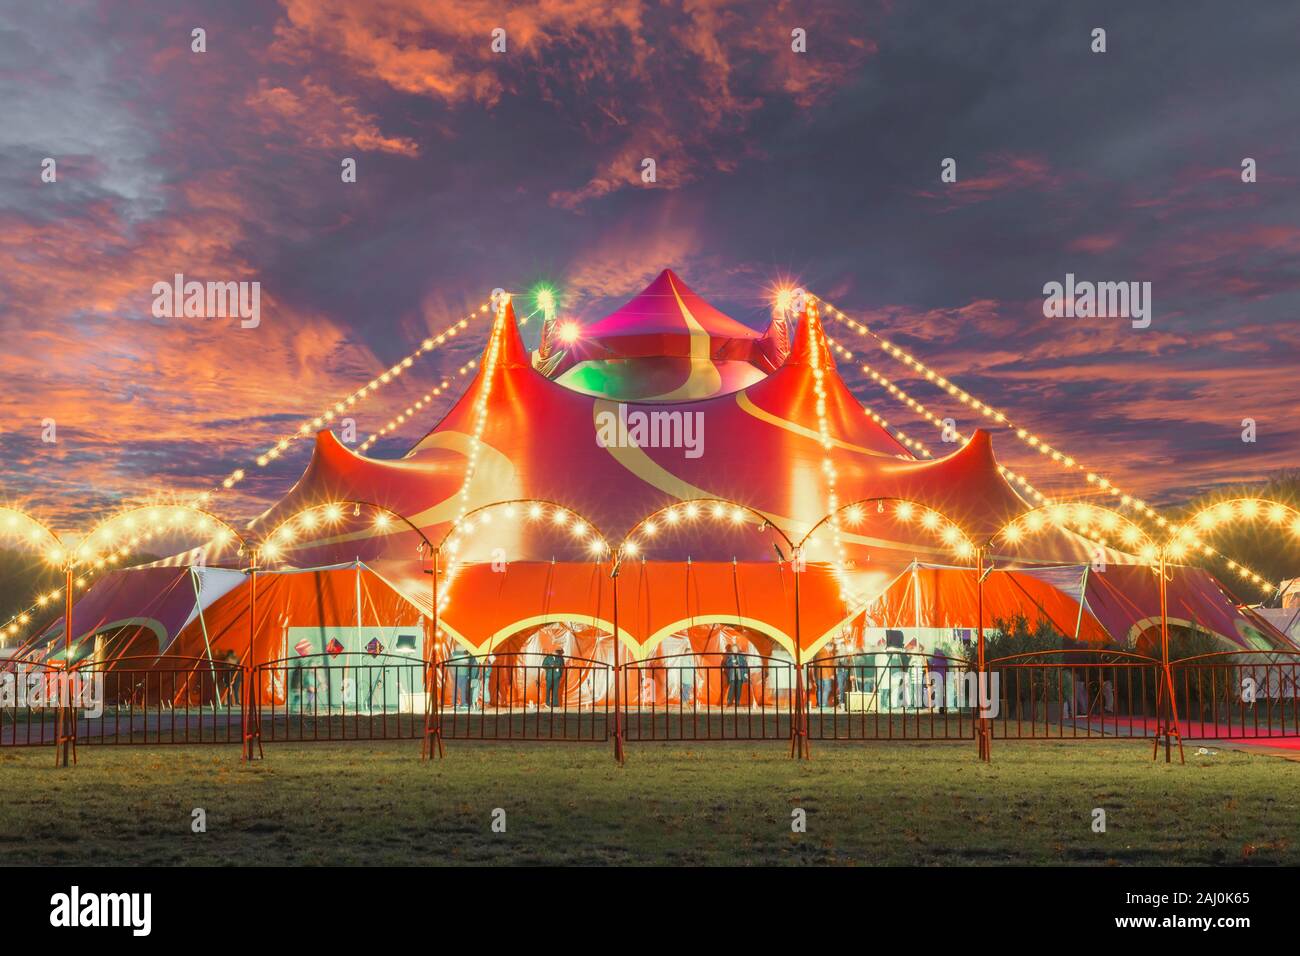 Night view of a circus tent under a warn sunset and chaotic sky Stock Photo